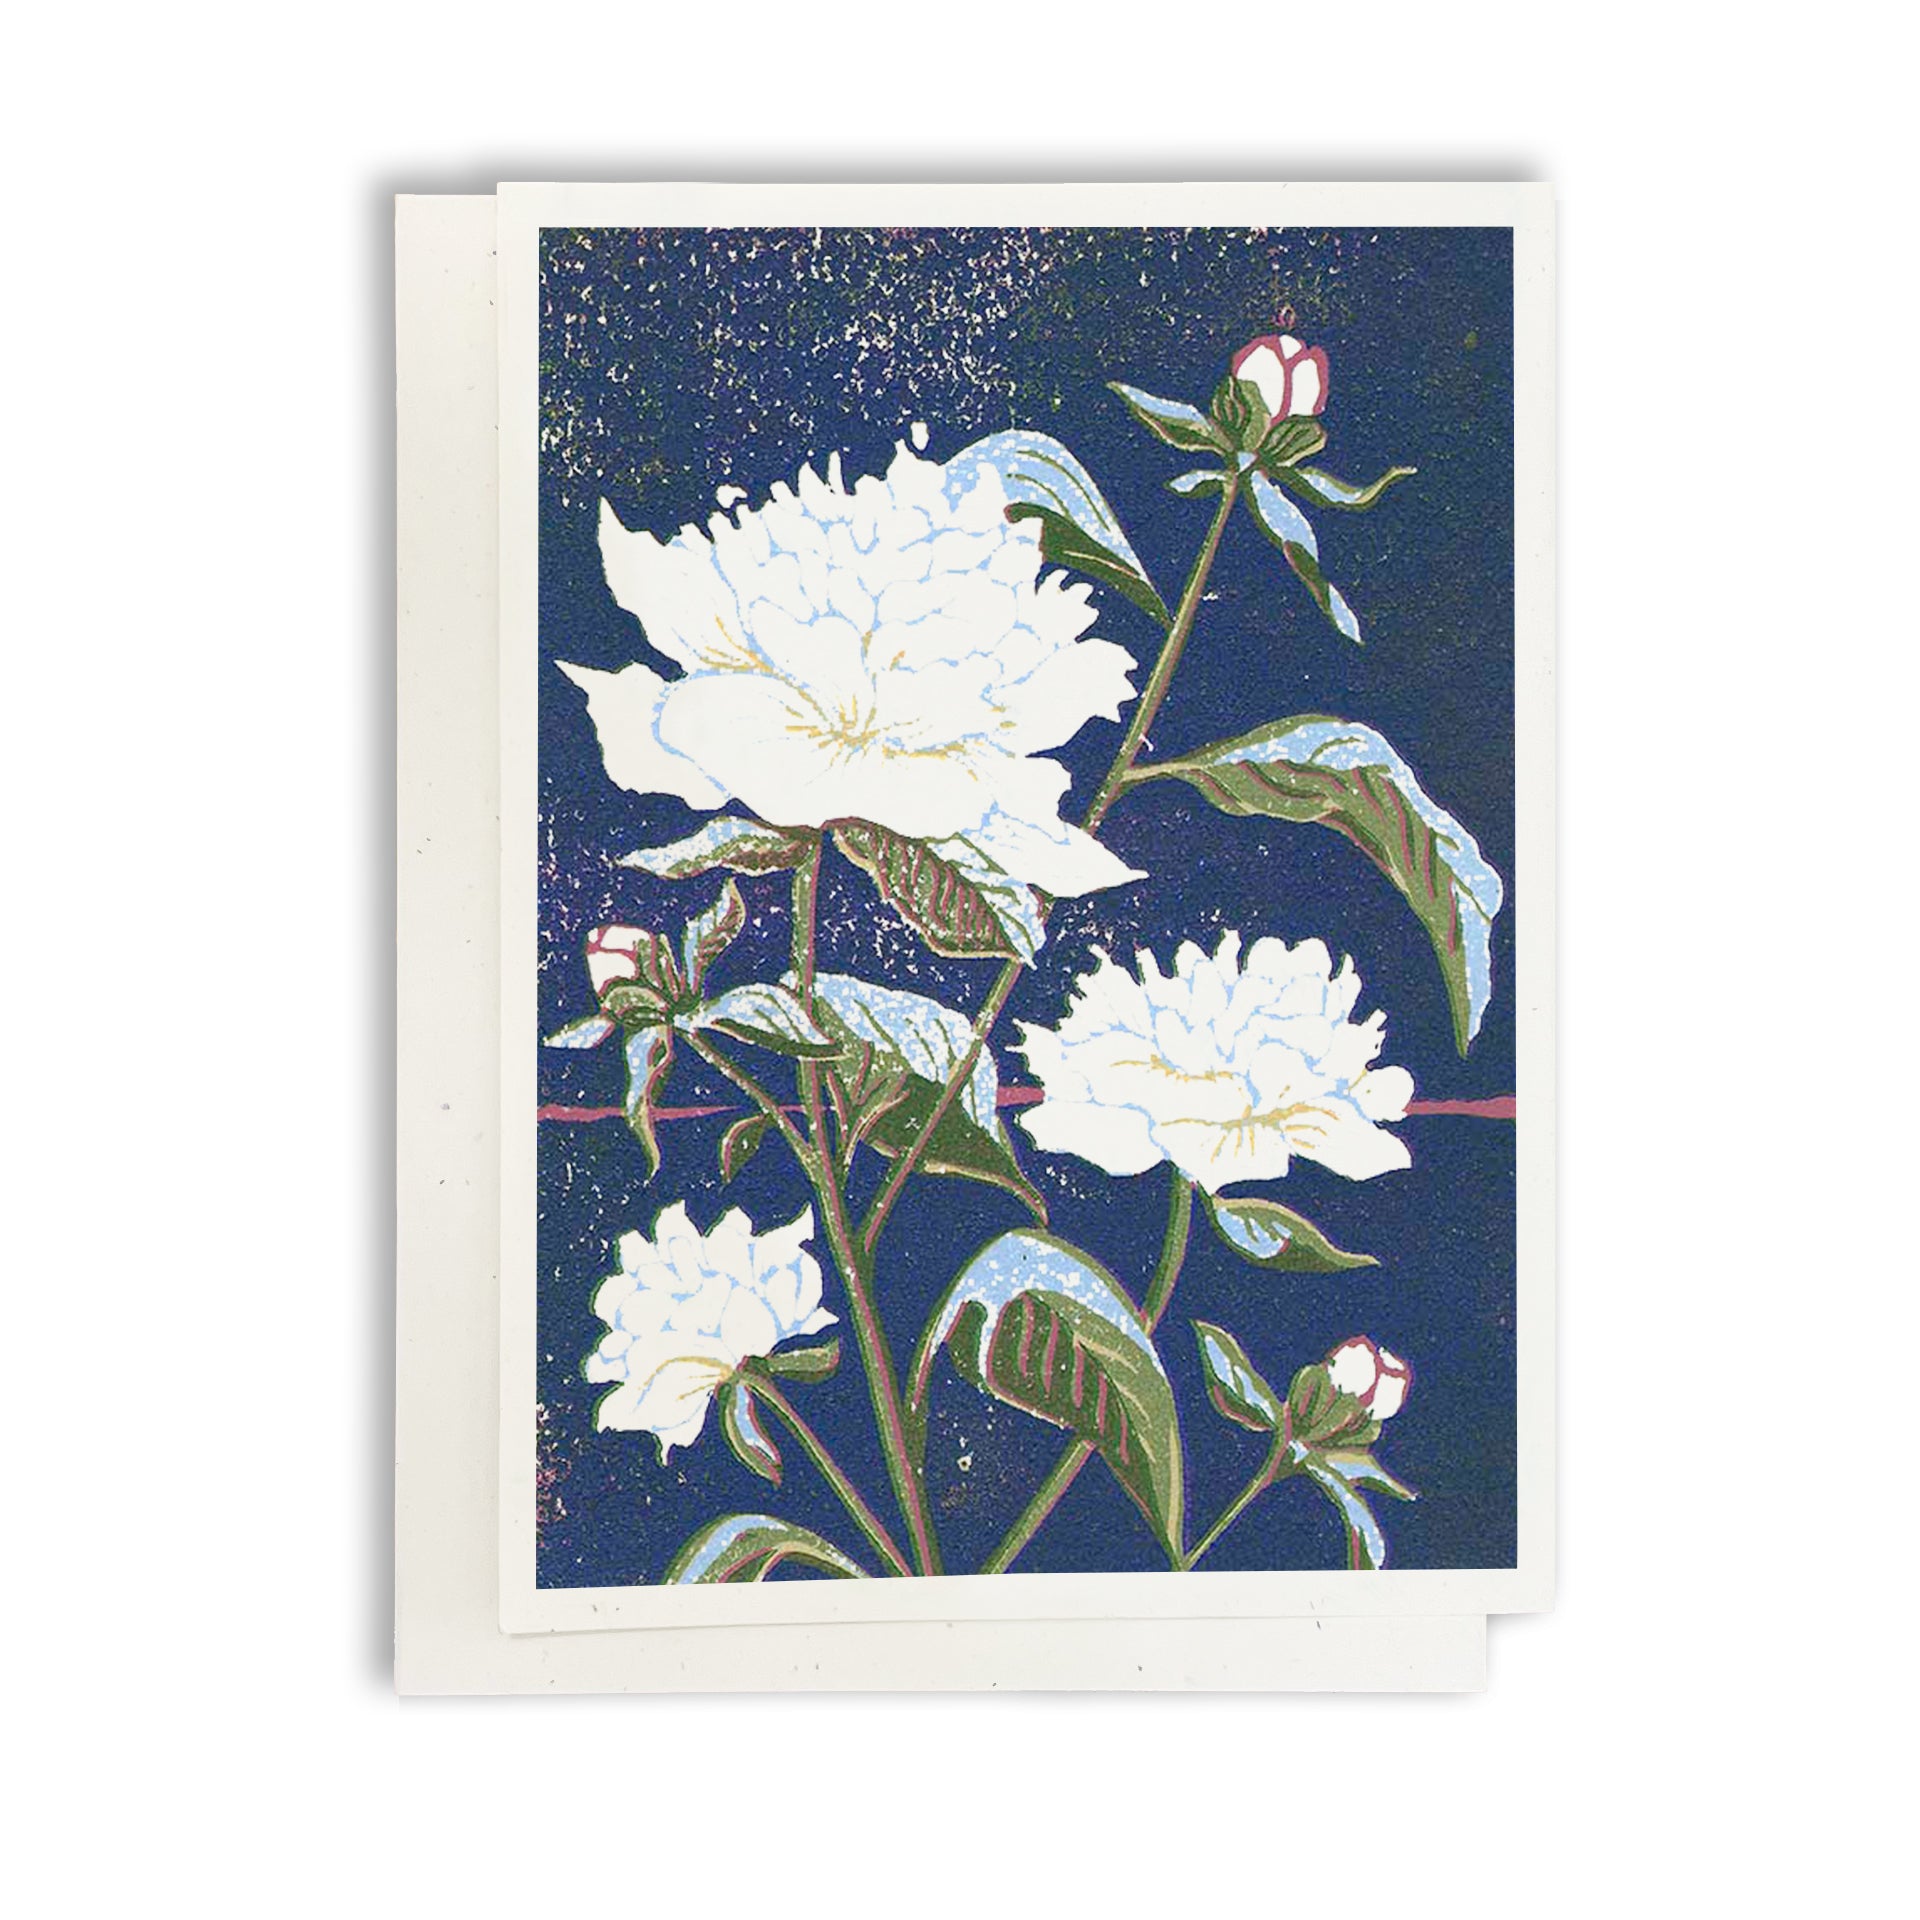 A casually elegant card featuring a digital reproductions of Natalia Wohletz's block print design titled Peony.